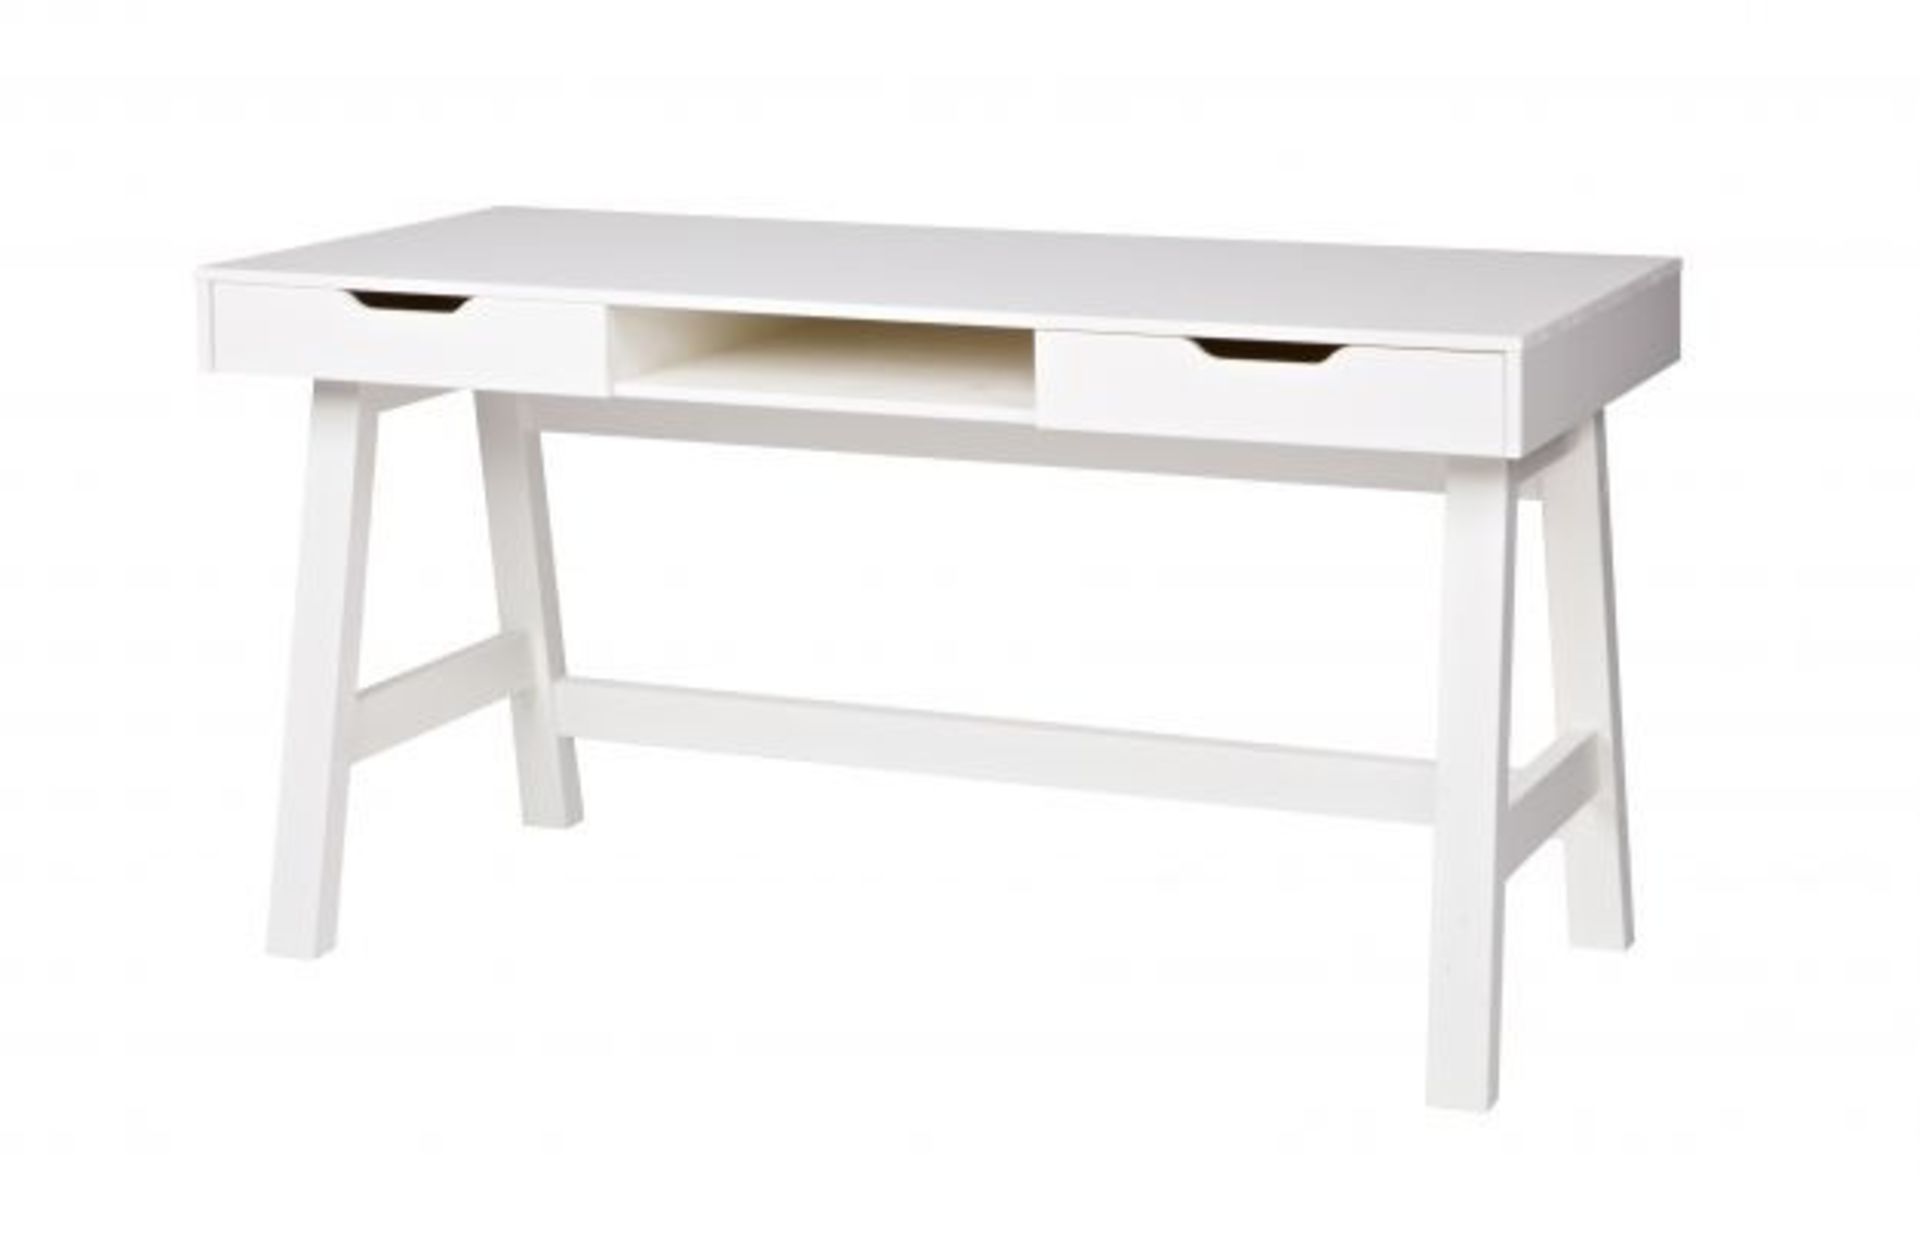 1 x WOOOD 'Nikki' Desk In White - Original Price £385.00 - Made In Holland - Sealed Boxed Stock - - Image 5 of 6